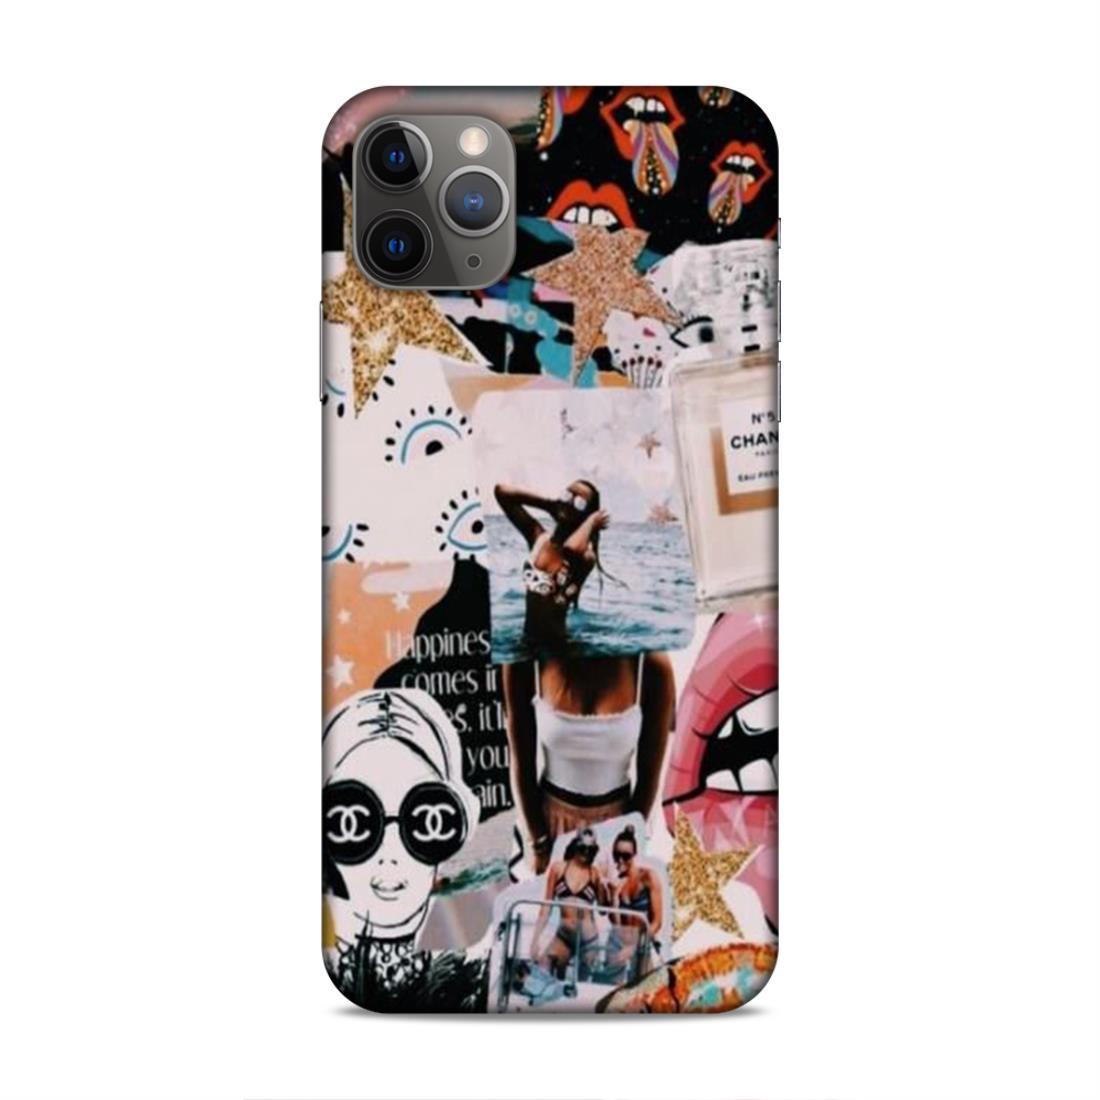 Happy Girl iPhone 11 Pro Max Mobile Case Cover